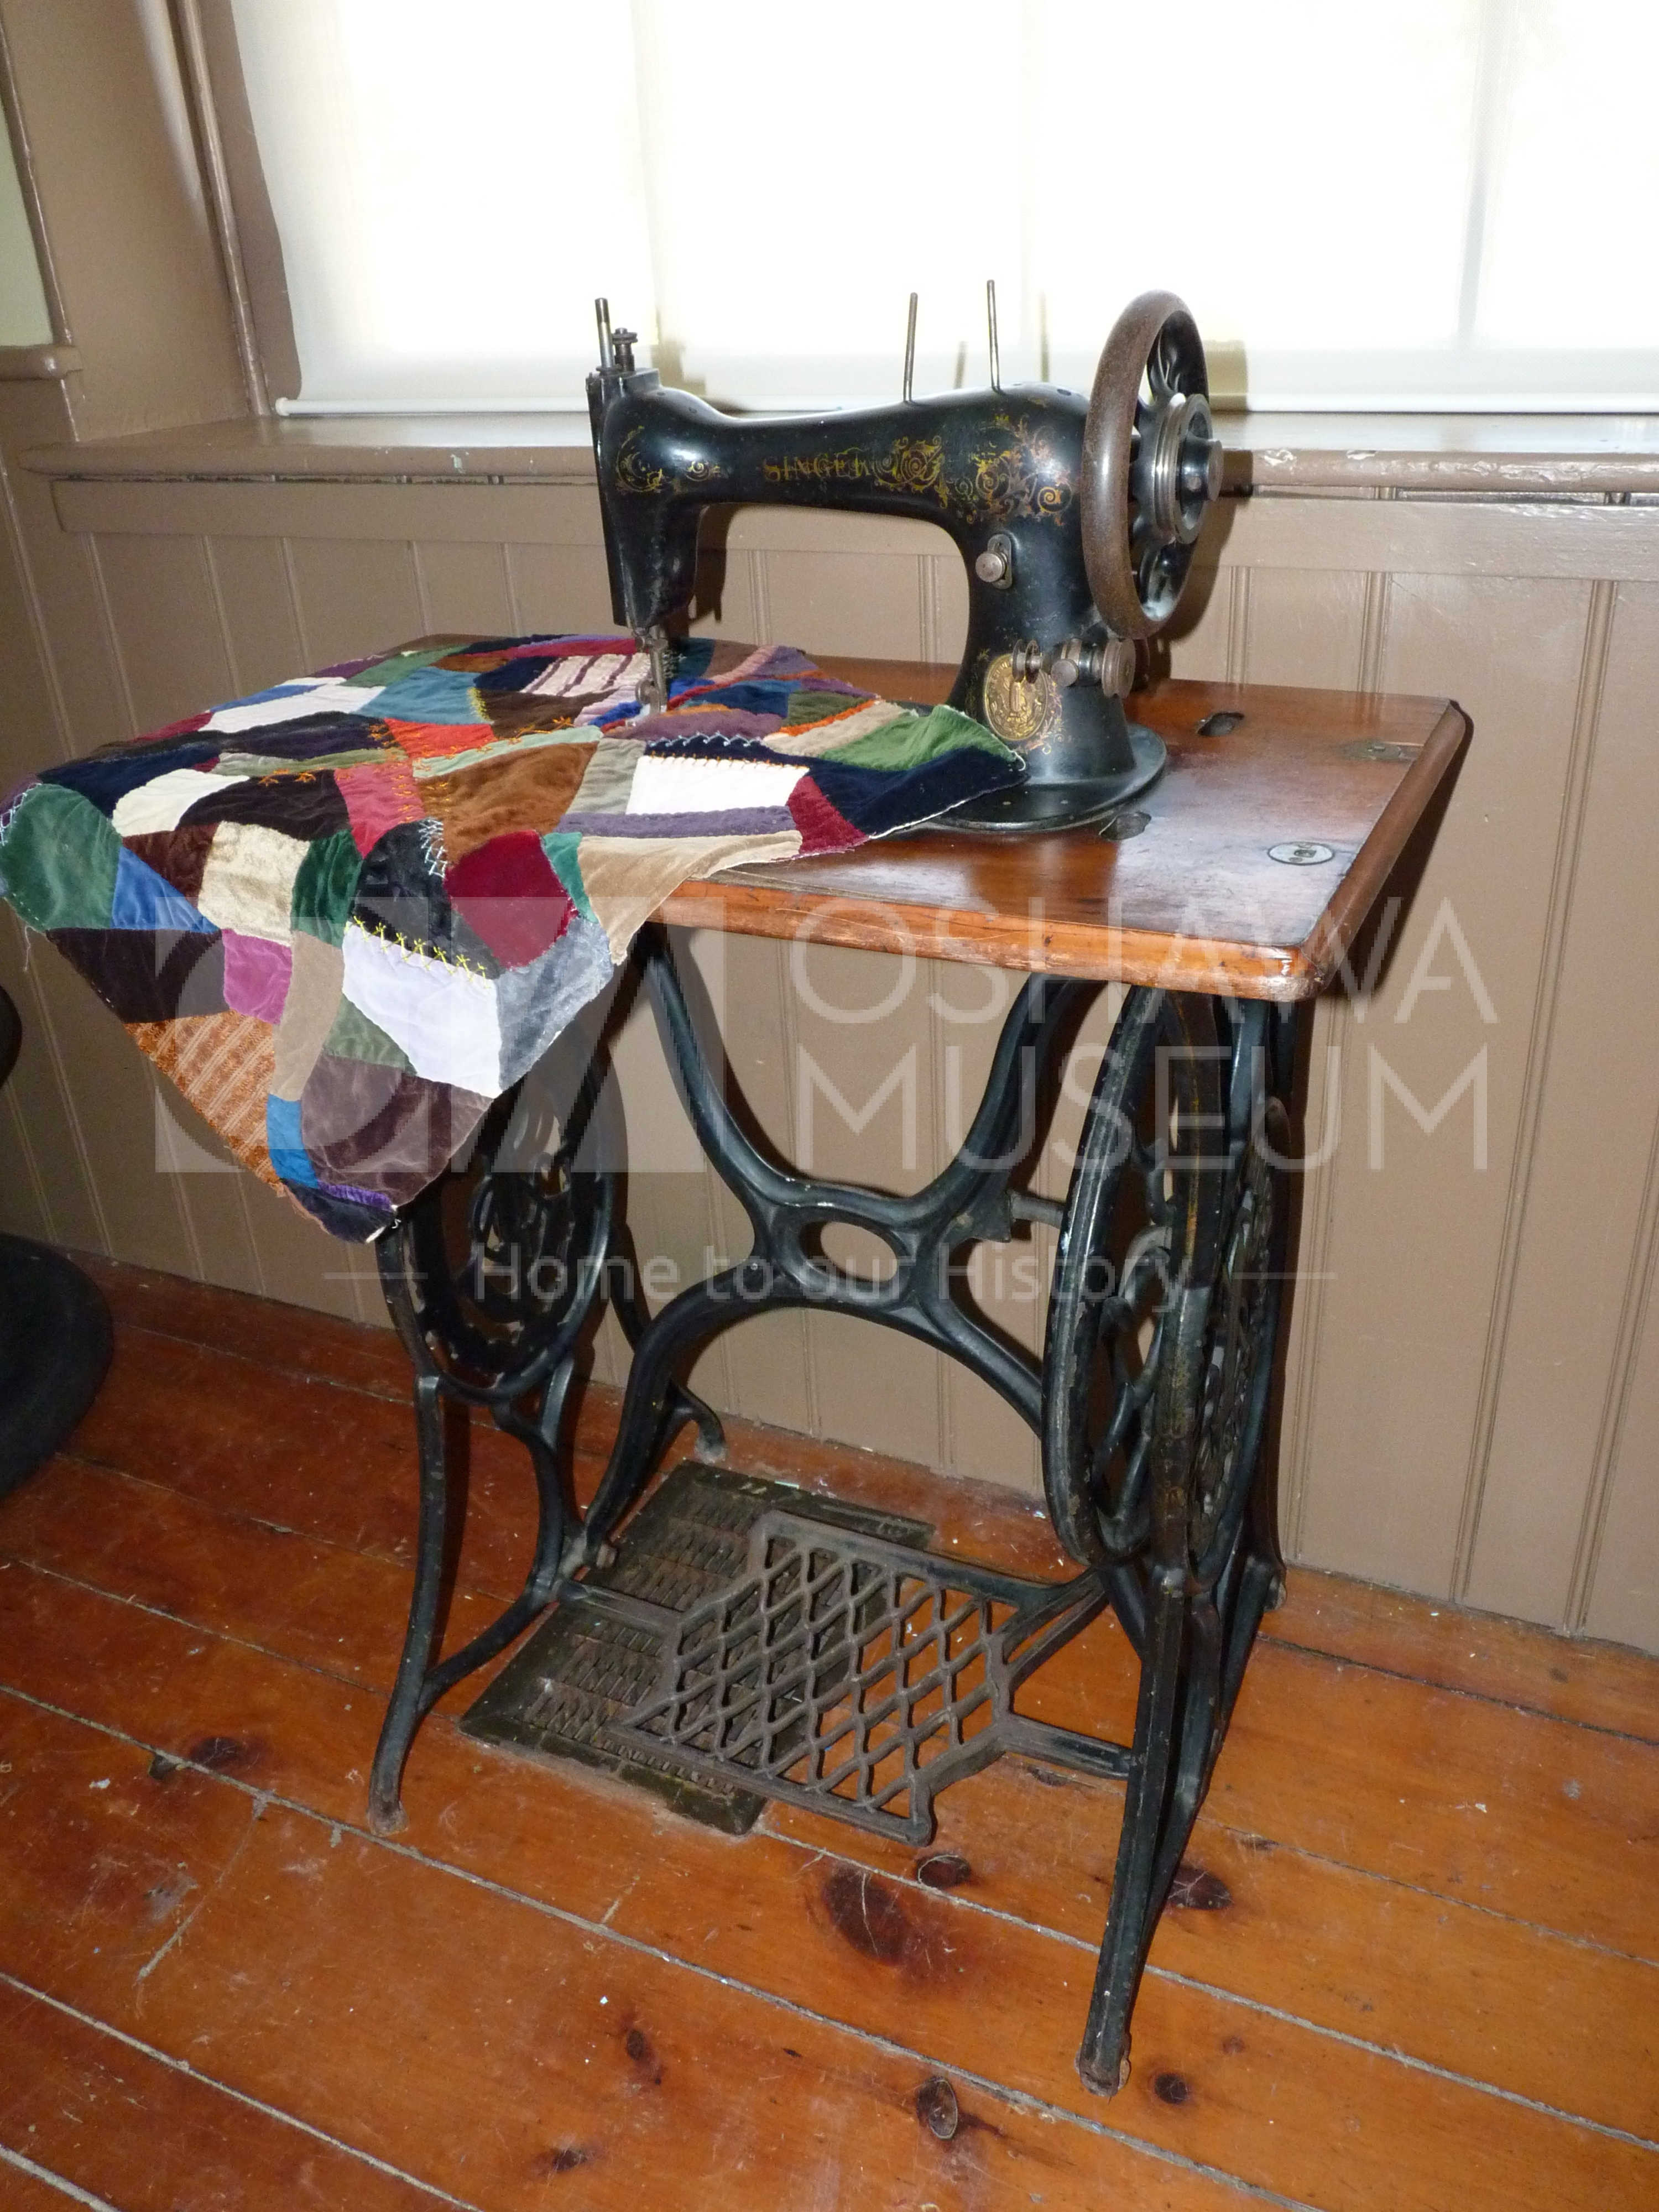 A wood and metal sewing machine with a colourful quilt square on the work surface of the sewing machine